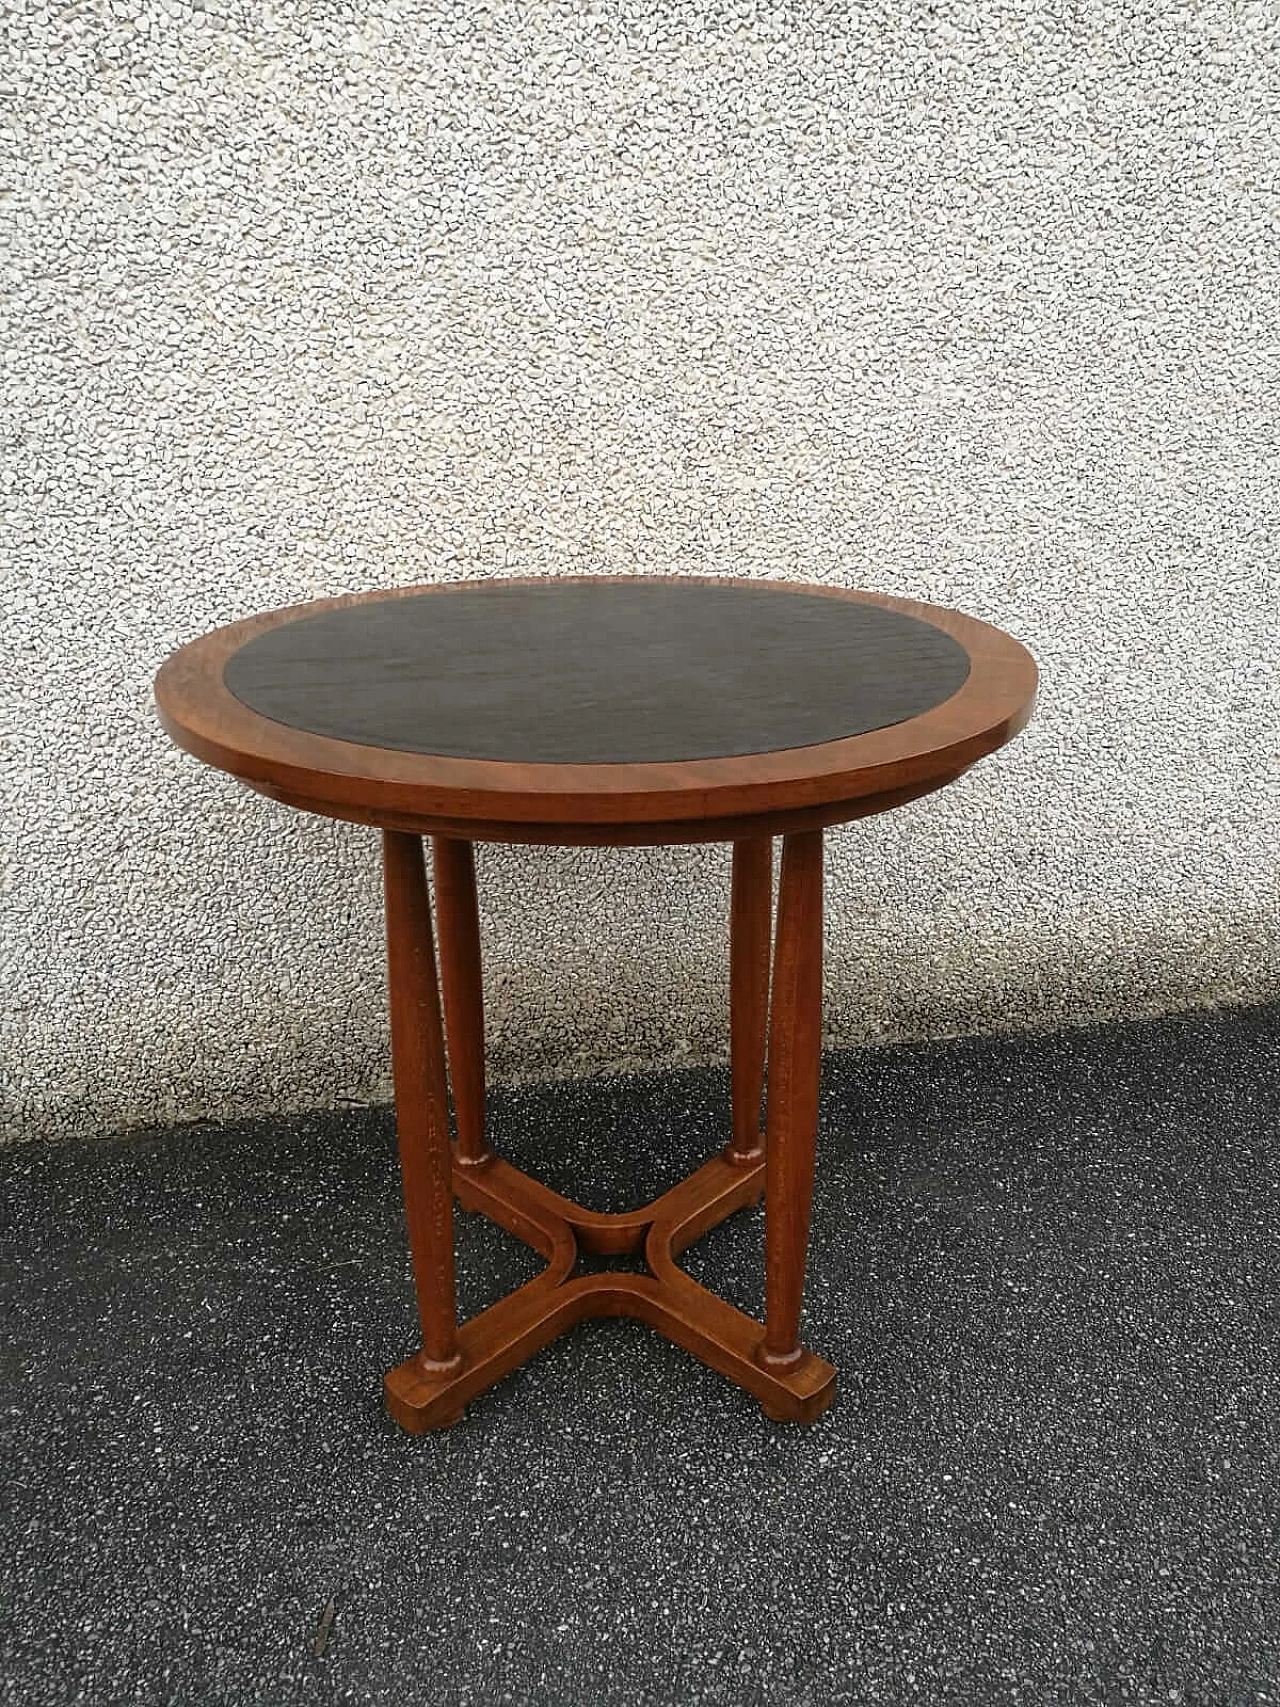 Coffee table in beech wood and top in Thonet leather, end of 19th century 1162649